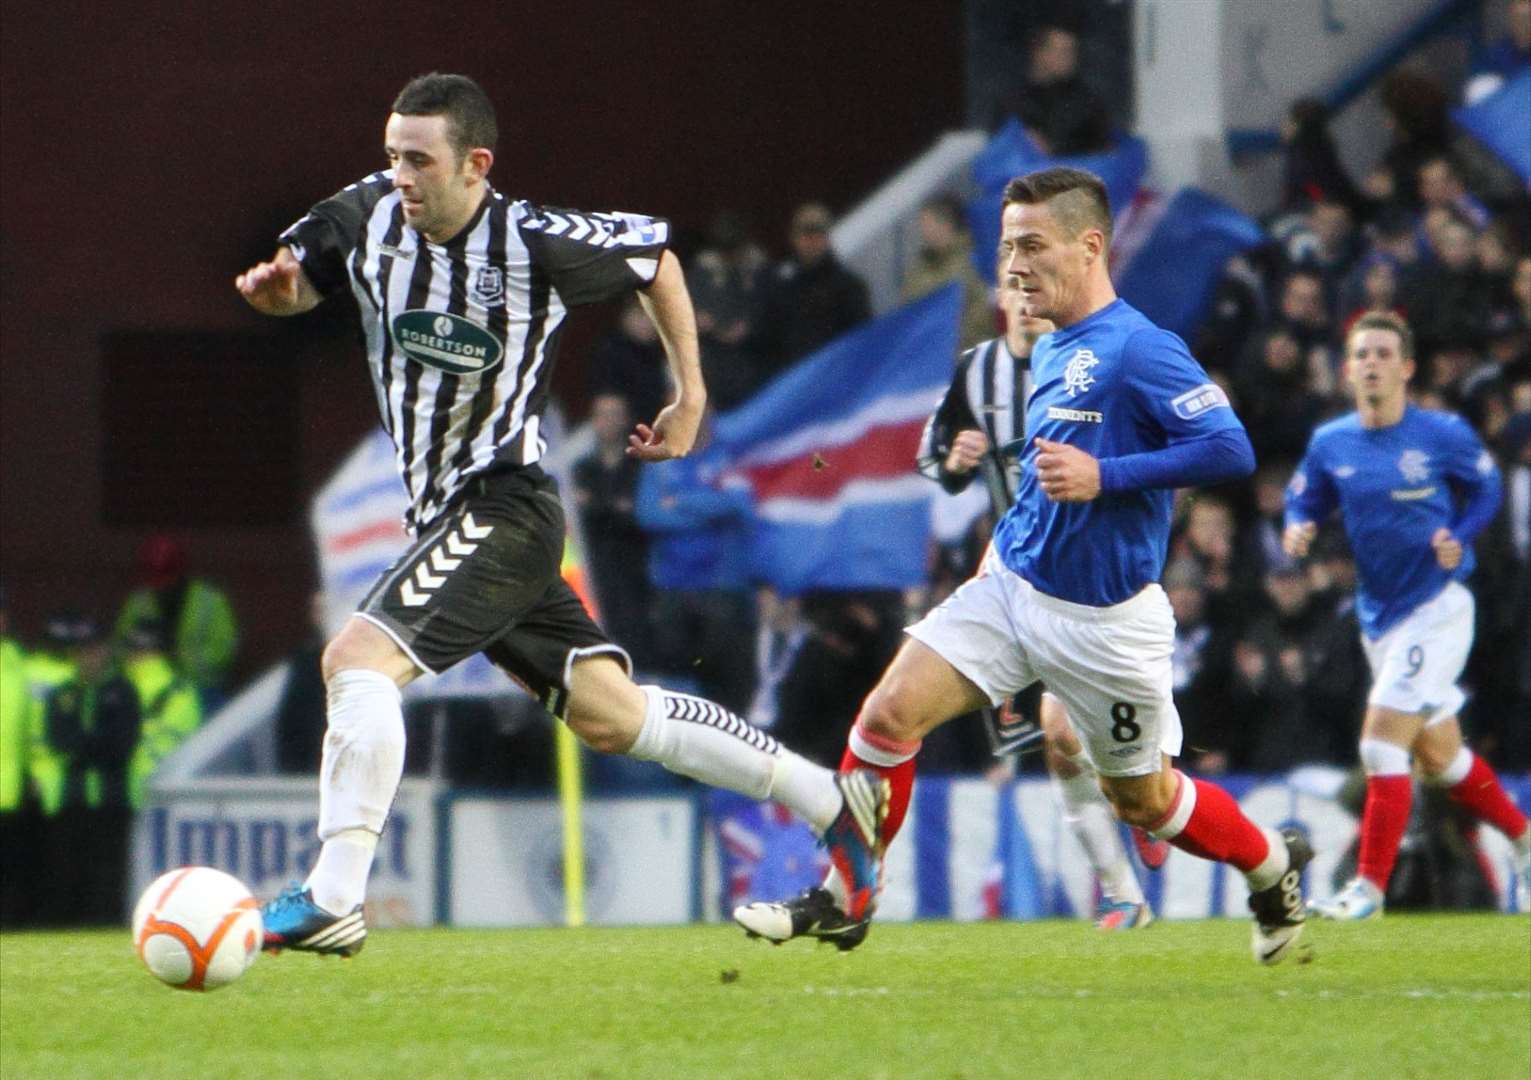 Elgin City played Rangers in the league in 2012-13, and could face their B team if league reconstruction is agreed.